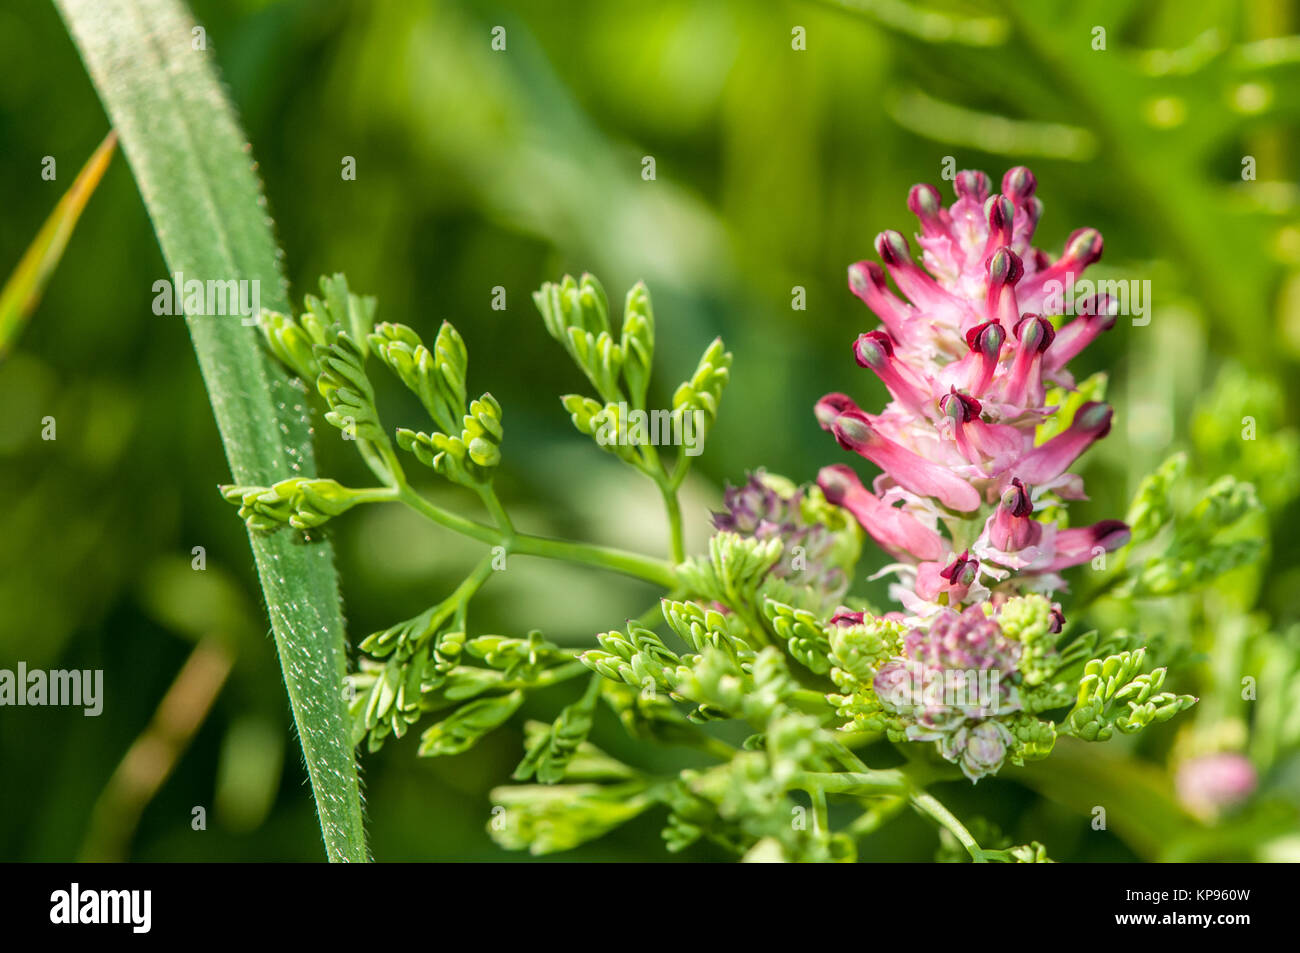 close-up view of common fumitory, Fumaria officinalis Stock Photo